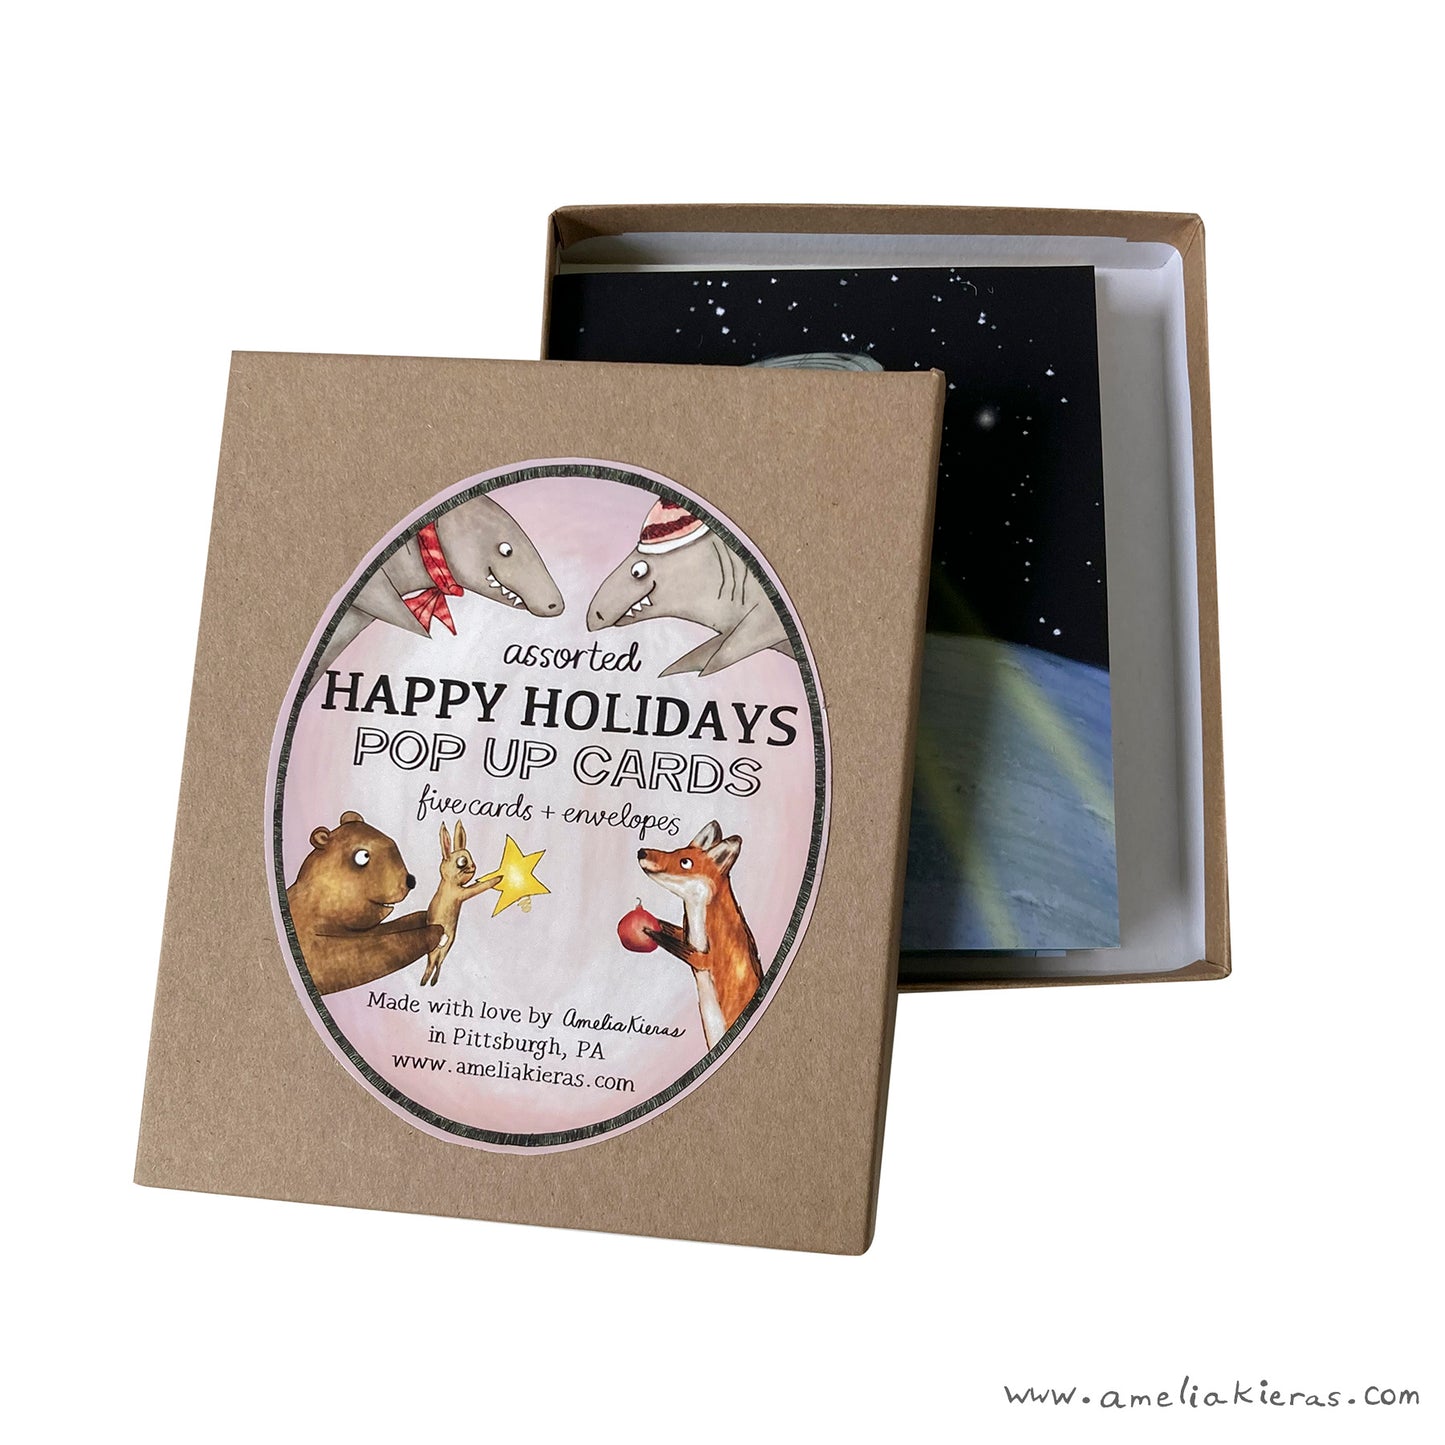 Happy Holidays Pop Up Card Box Set - Set of Five Assorted Pop Up Cards